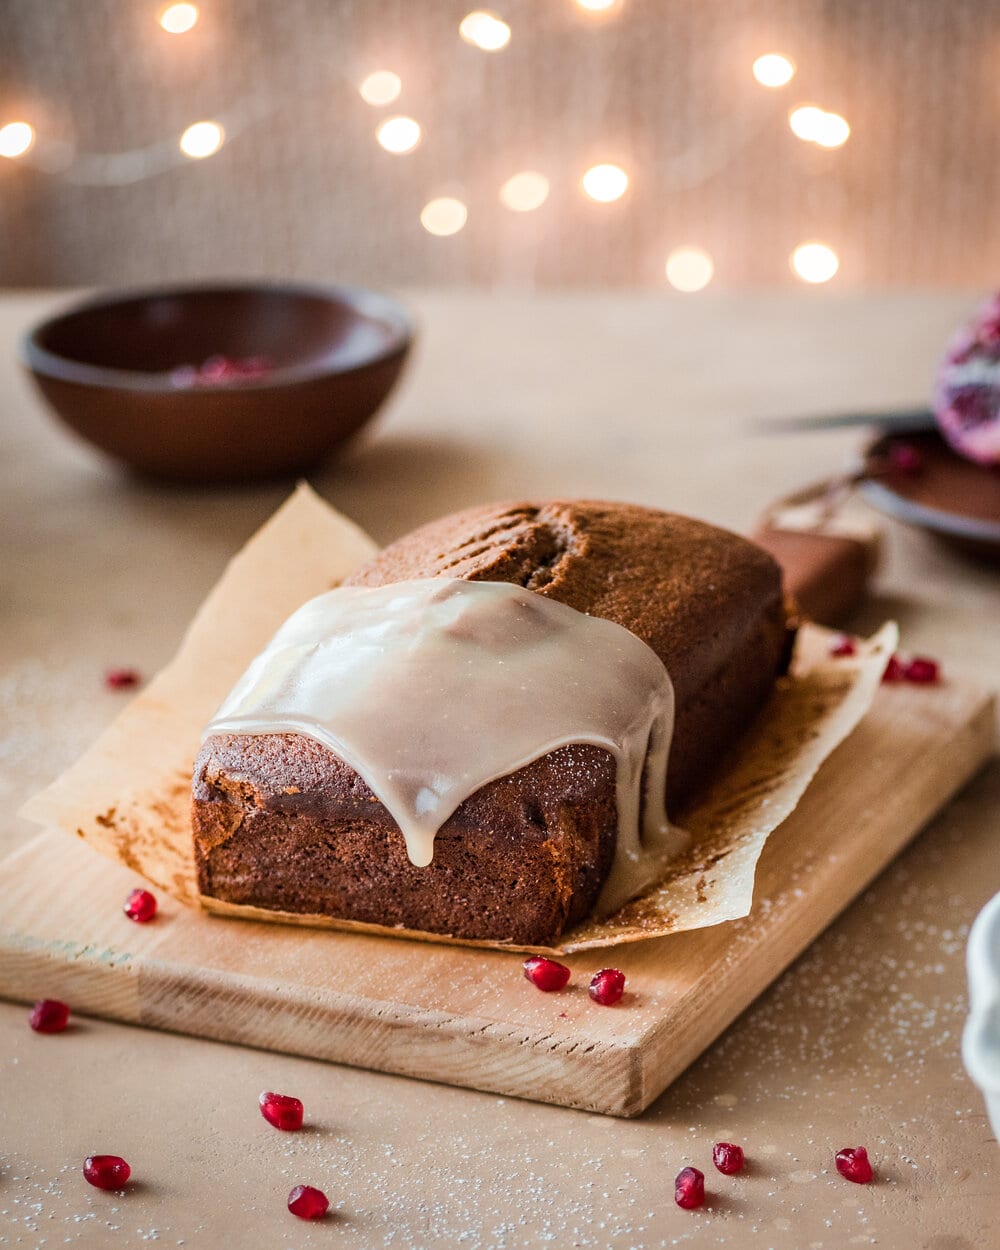 Vanilla cream sauce dripping off gingerbread loaf.